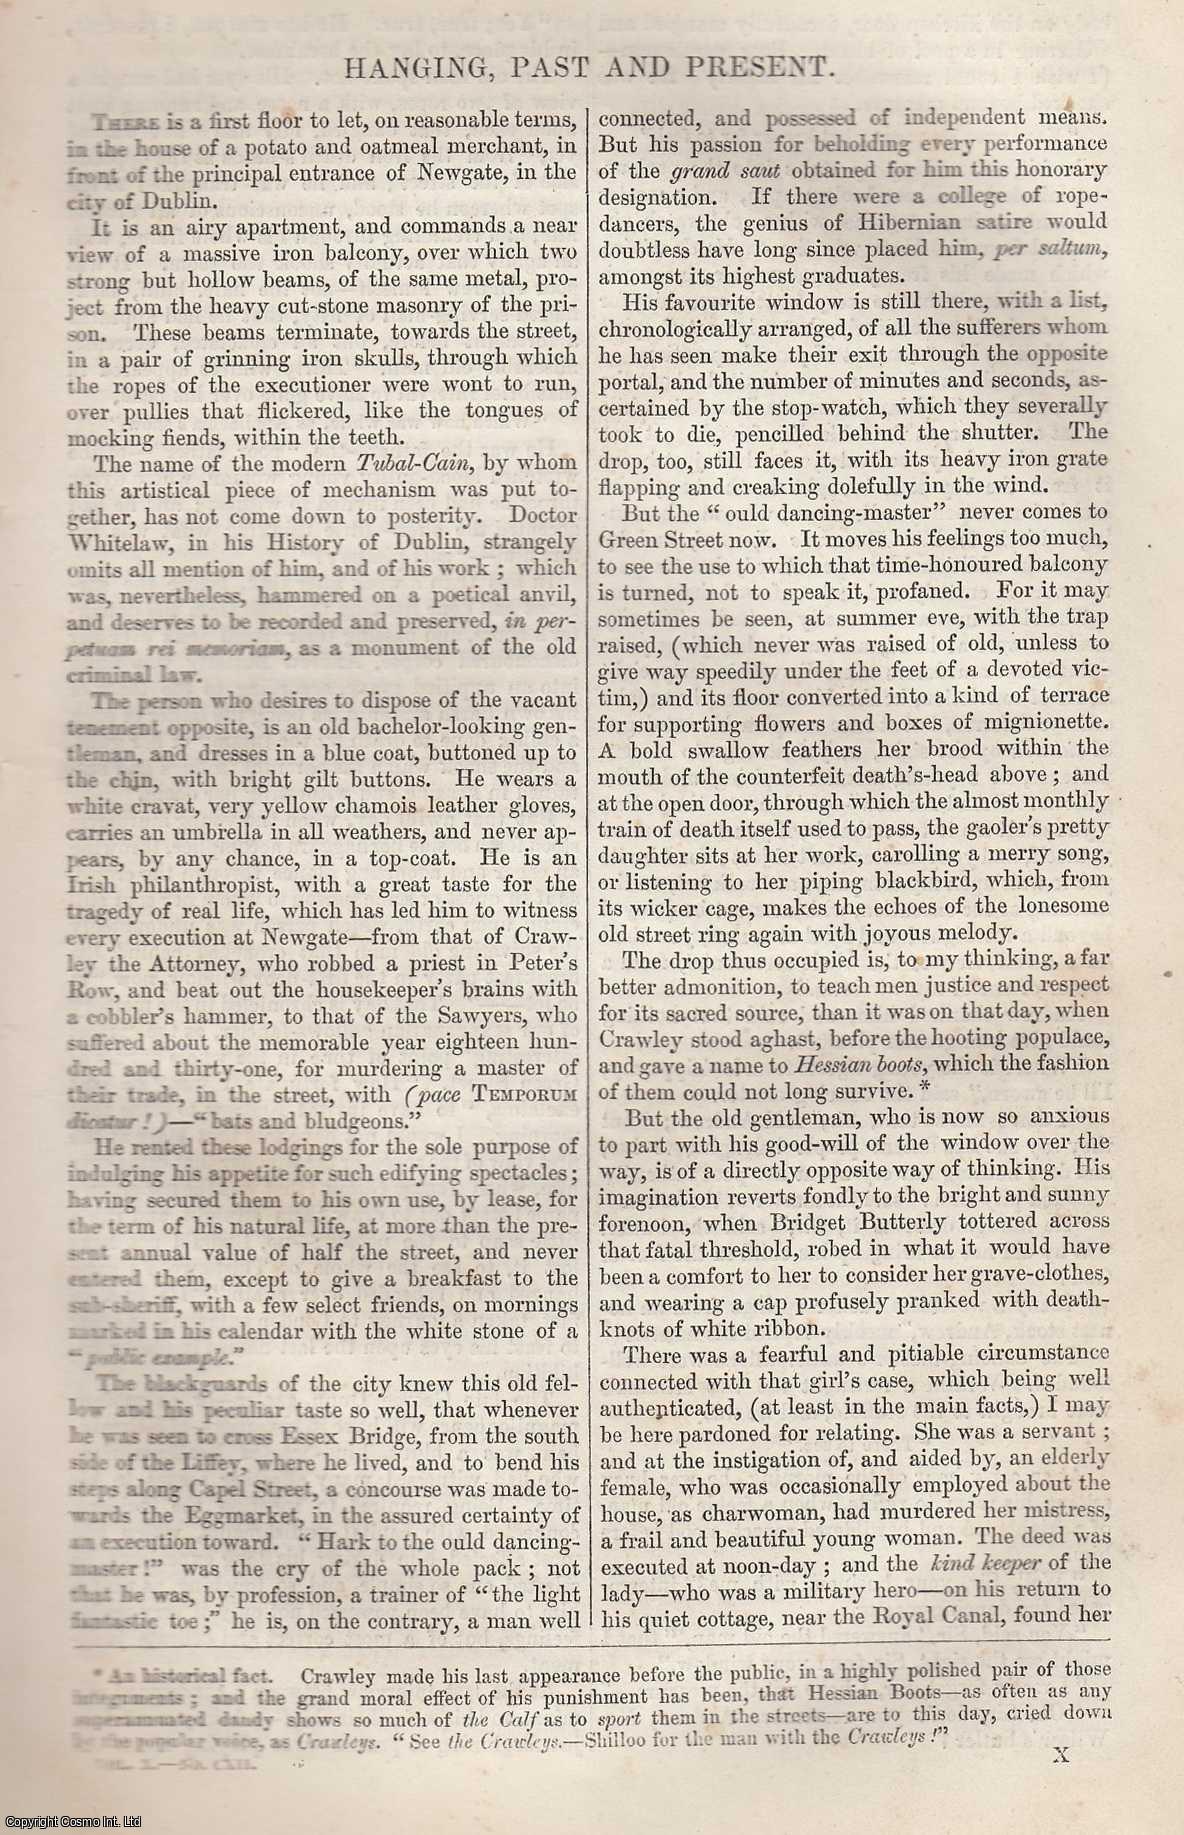 --- - Hanging, Past and Present. An original article from Tait's Edinburgh Magazine, 1843.